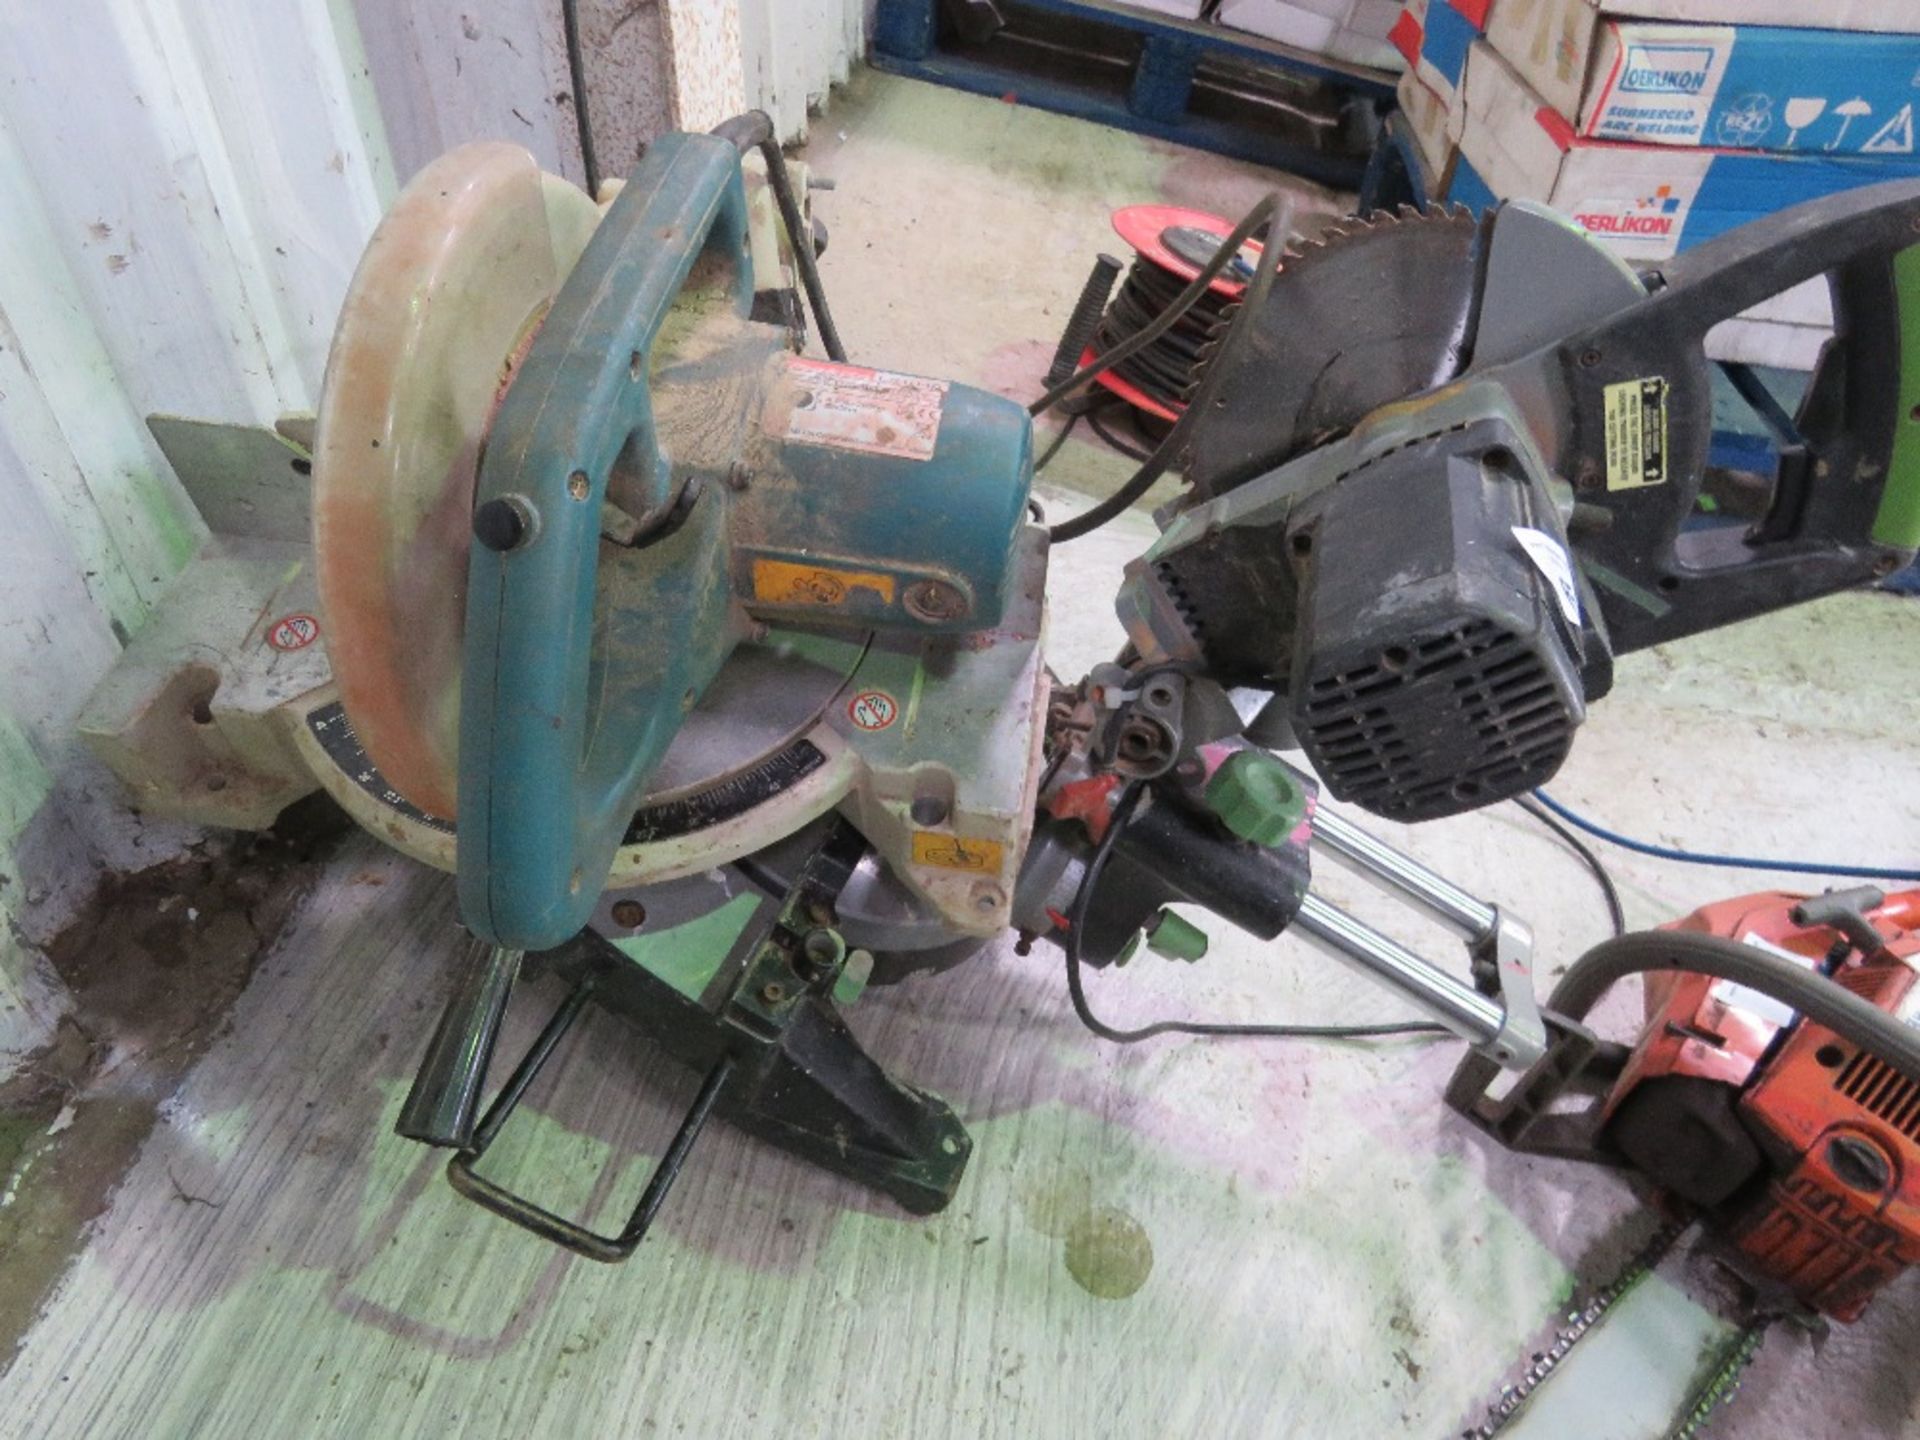 2 X MITRE SAWS, ELECTRIC POWERED - Image 9 of 9